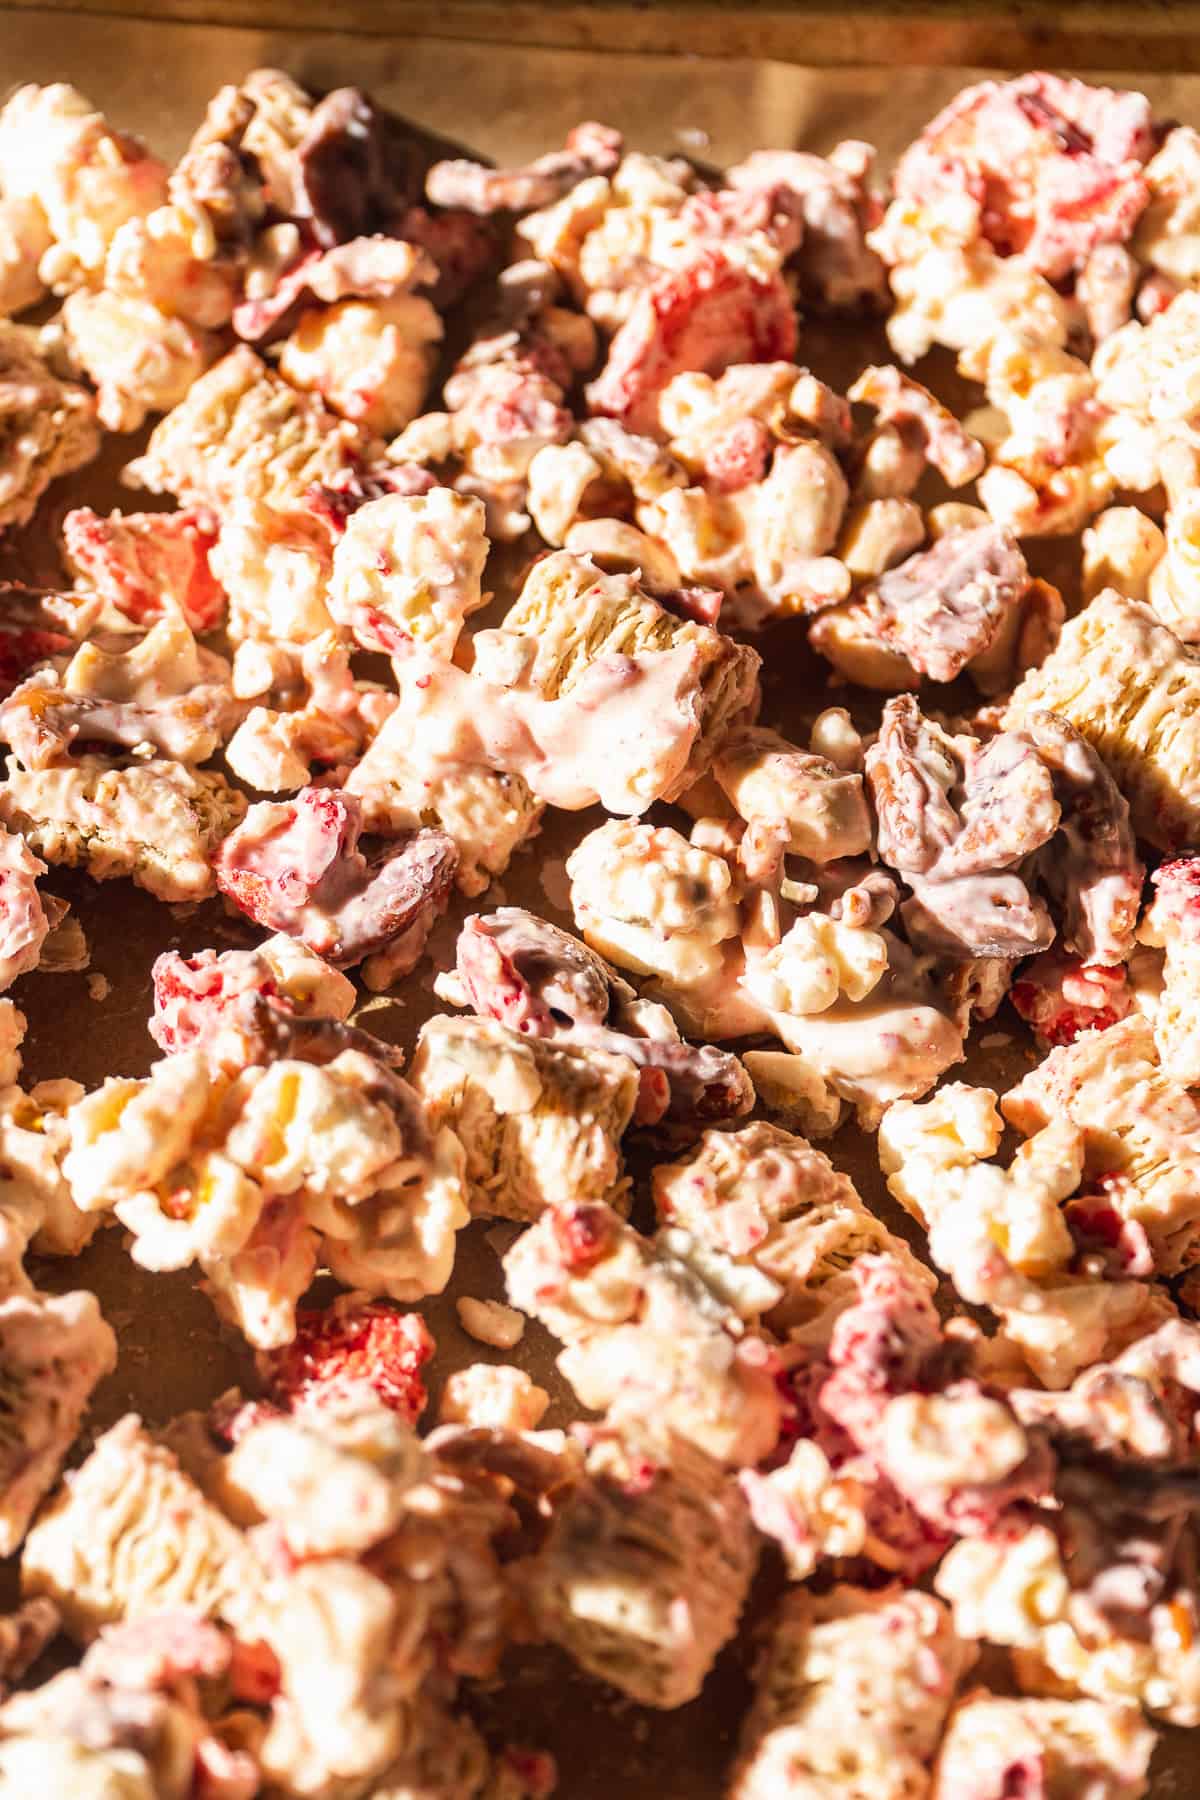 White chocolate strawberry coated cereal and mix ins on a baking pan.